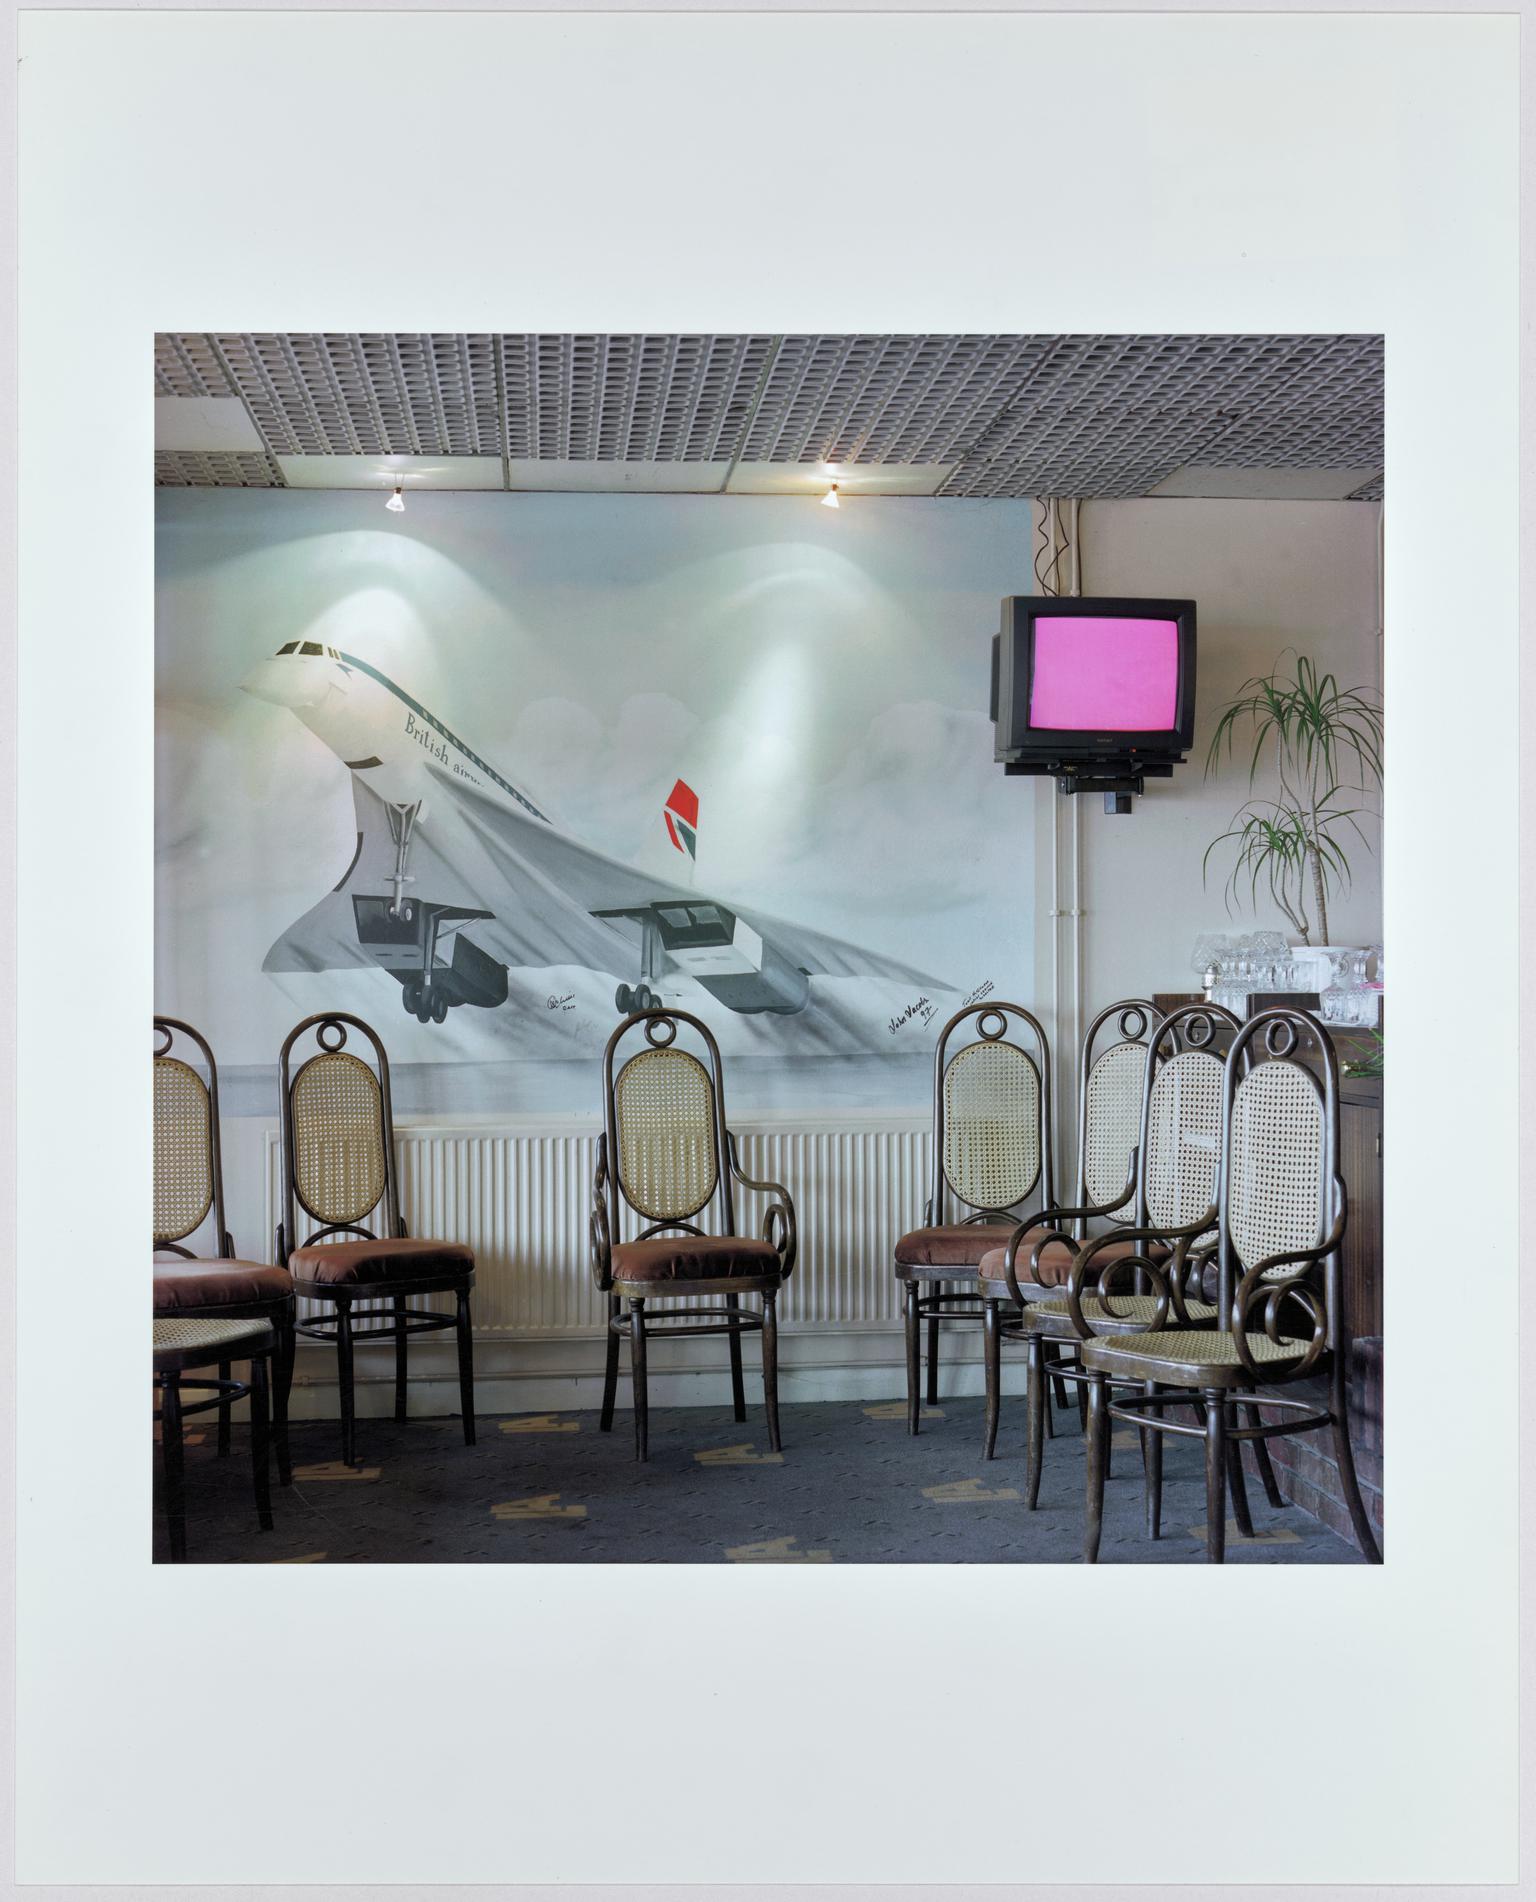 Lydd Airport. Cafe with painting of Concorde. Kent